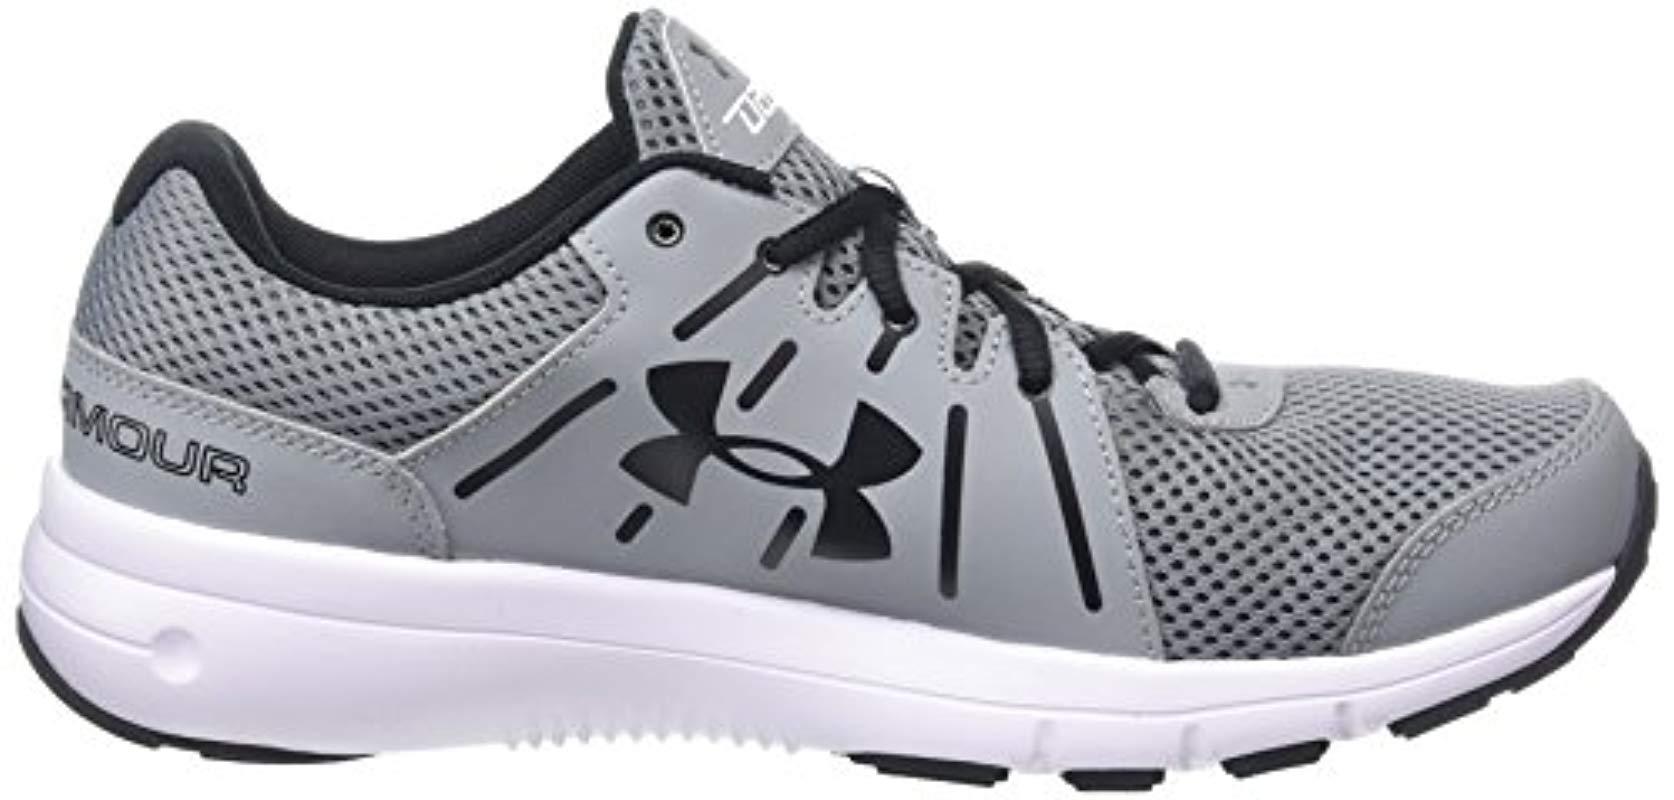 Under Armour Leather Dash 2 Running Shoe for Men - Lyst